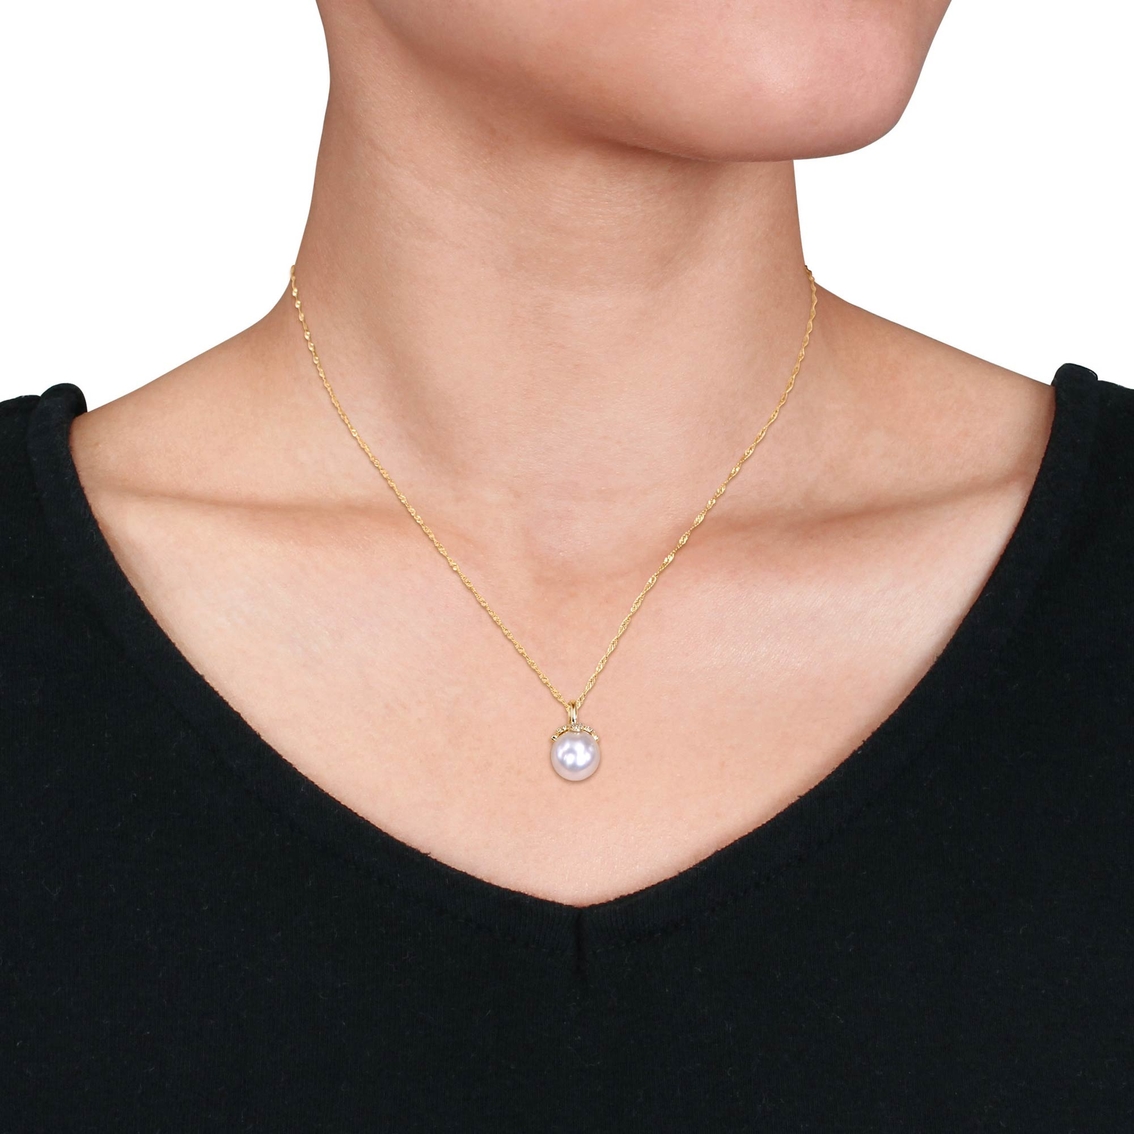 Michiko 14K Gold South Sea Cultured Pearl and Diamond Accent Necklace - Image 2 of 2